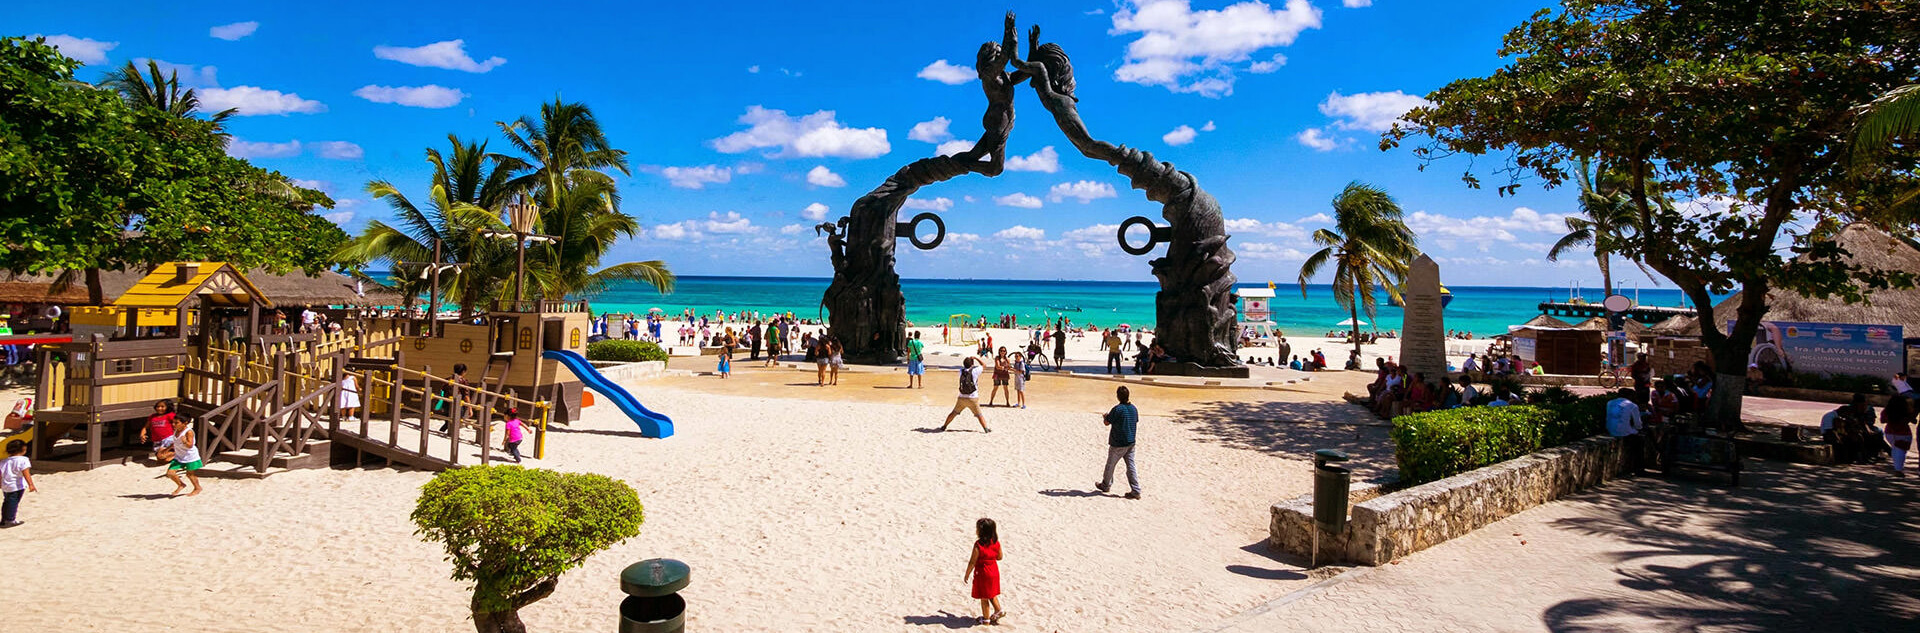 How to get to Playa del Carmen from Cancun Airport